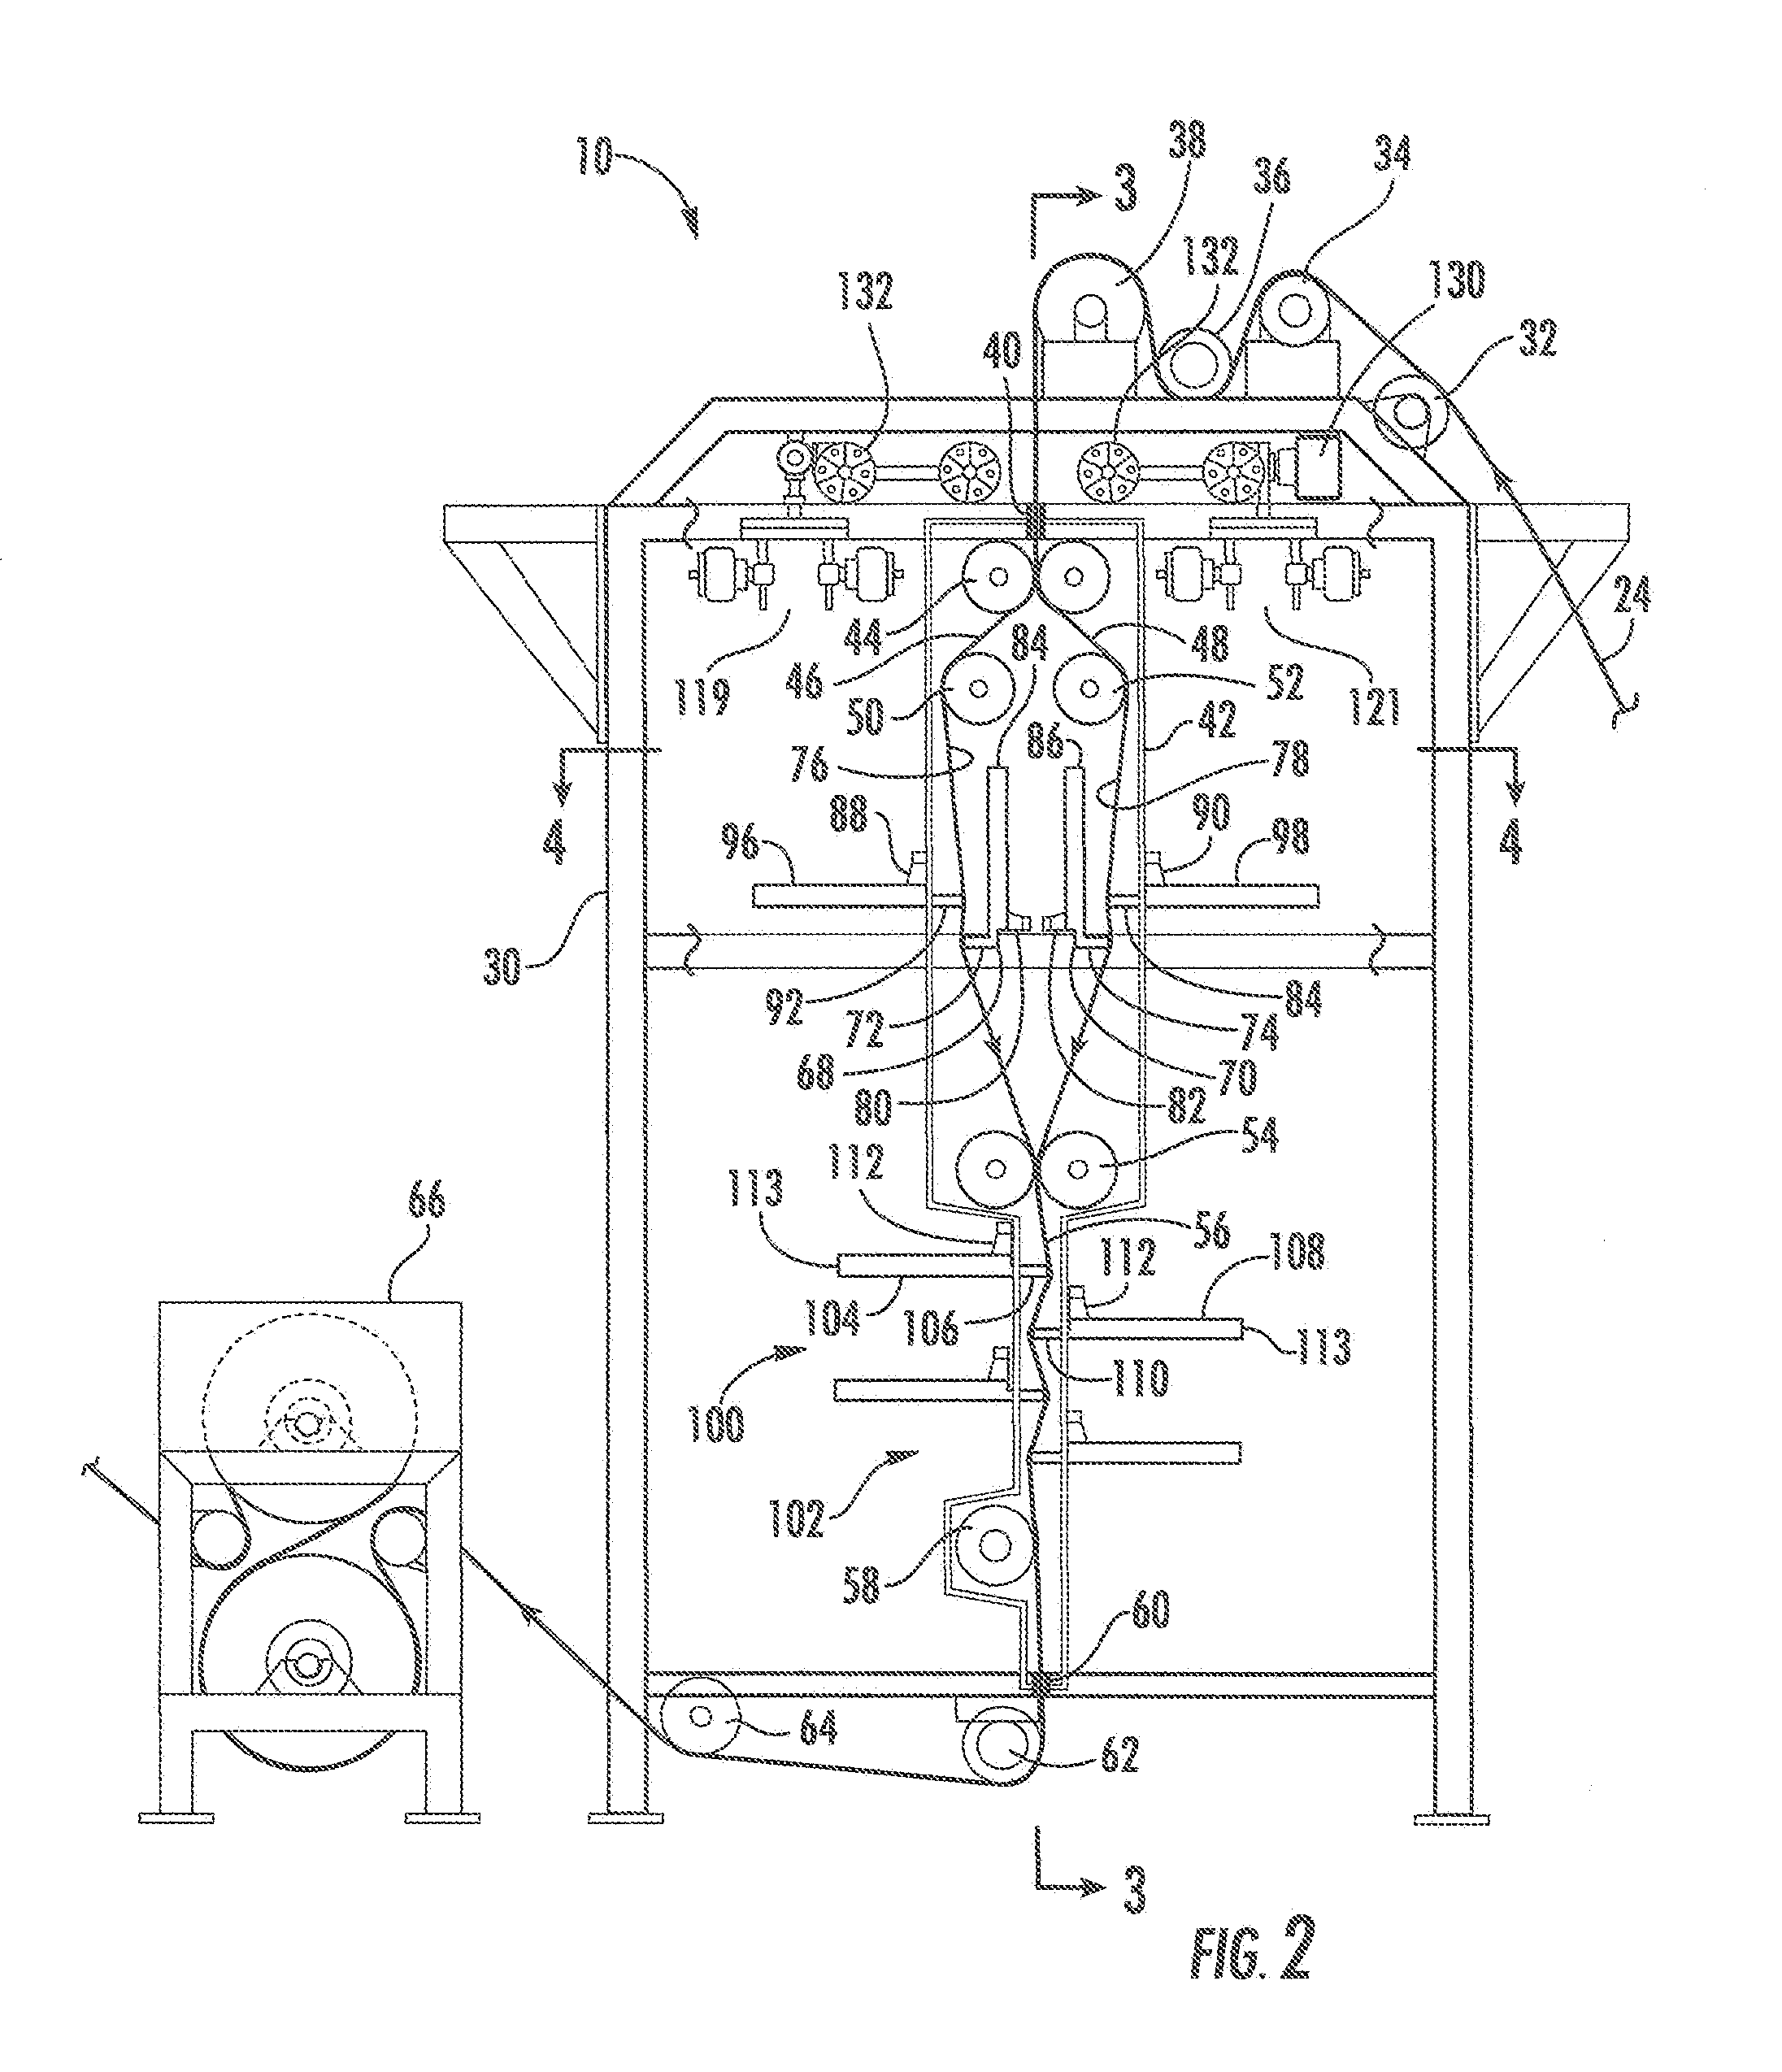 Apparatus and method of foam dyeing a traveling sheet of textile yarn